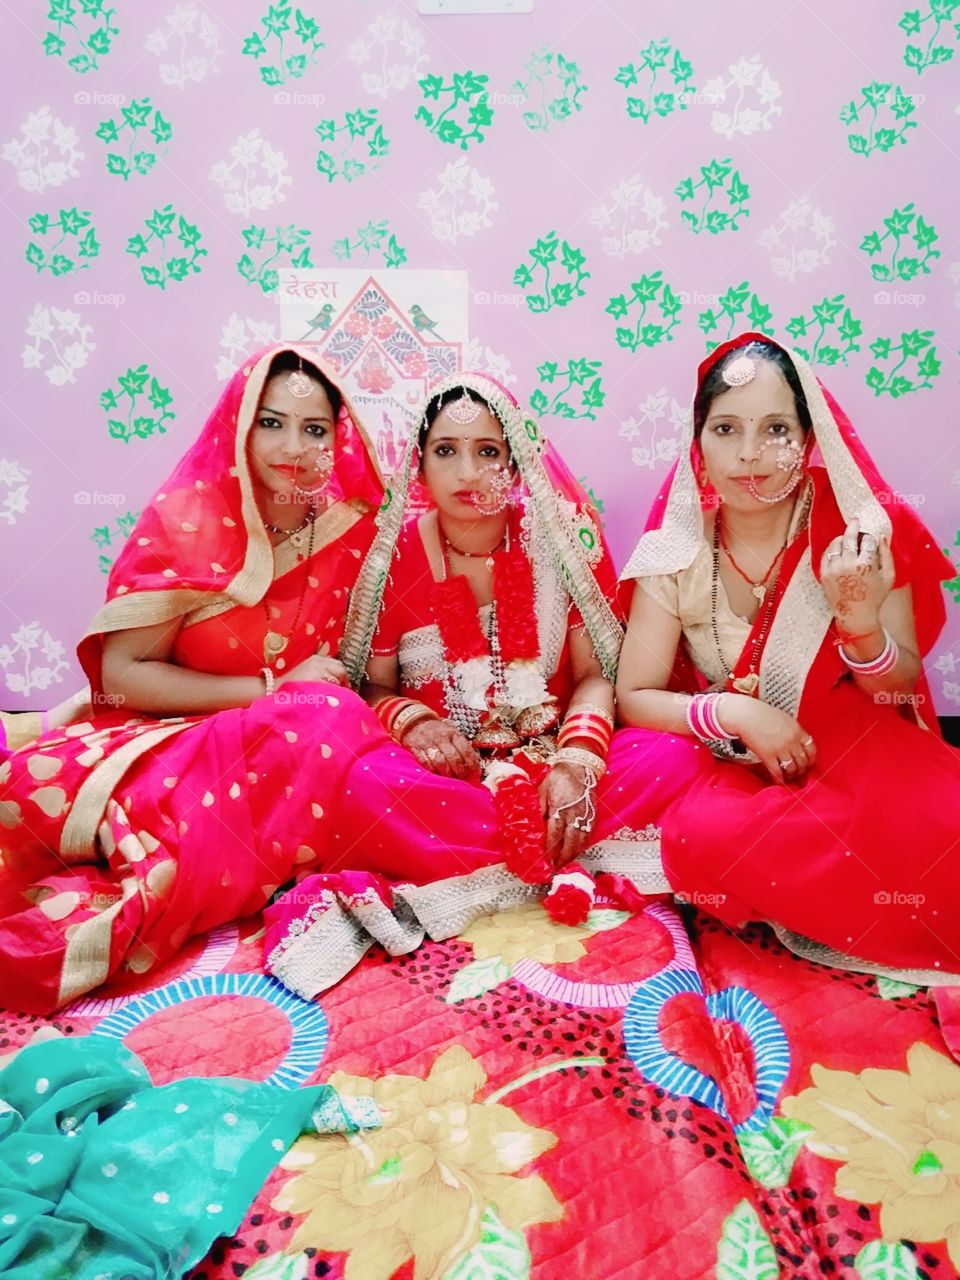 marriage of Indian culture